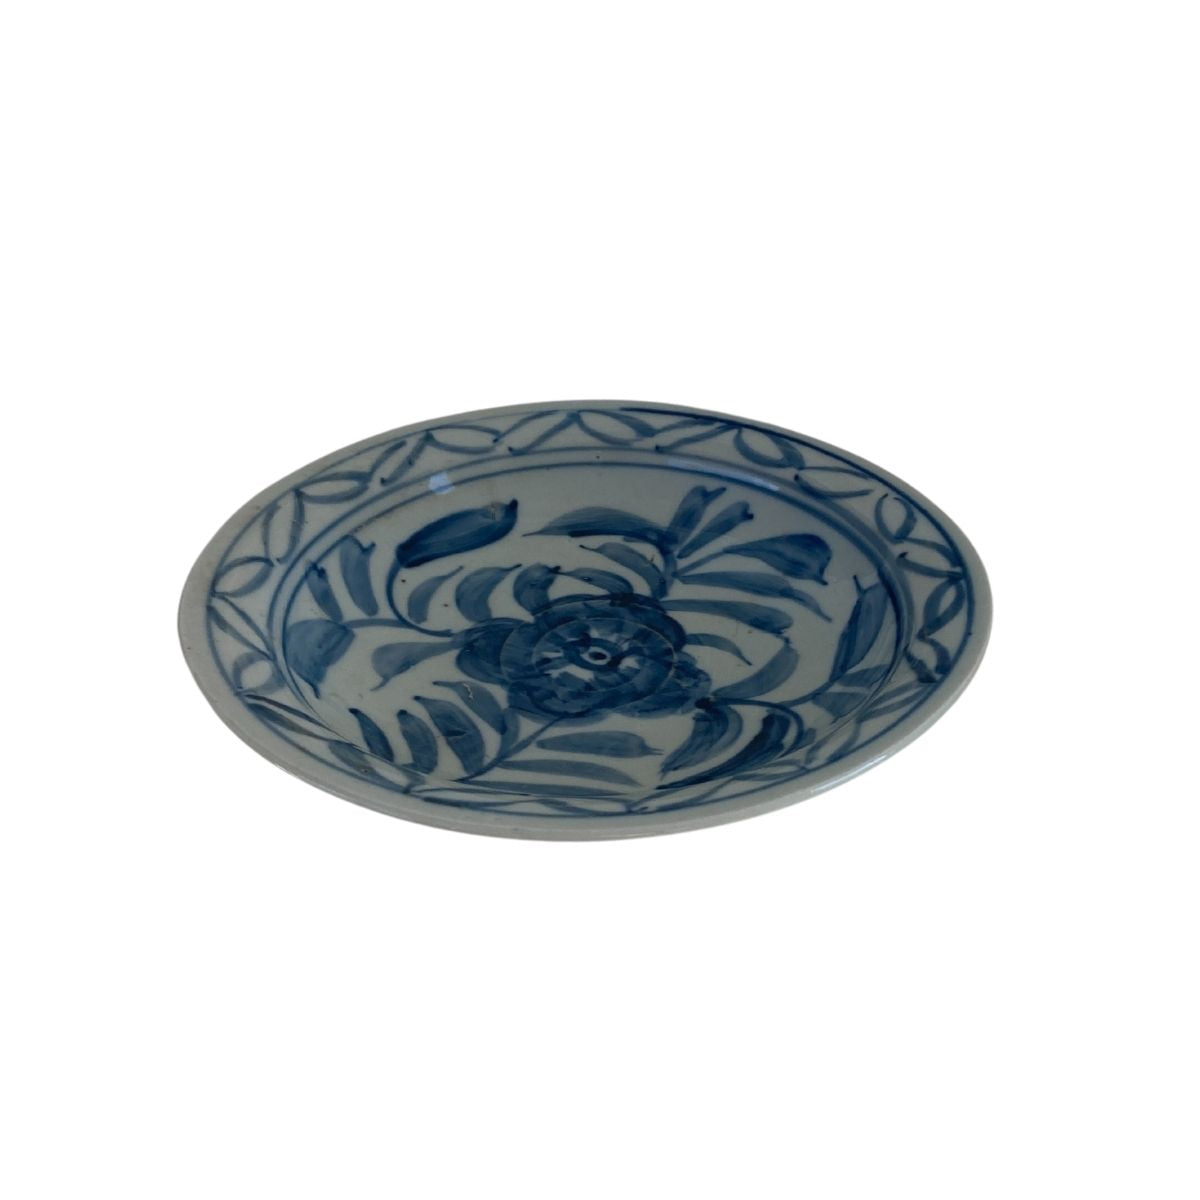 Blue and White Plate, Peony Print